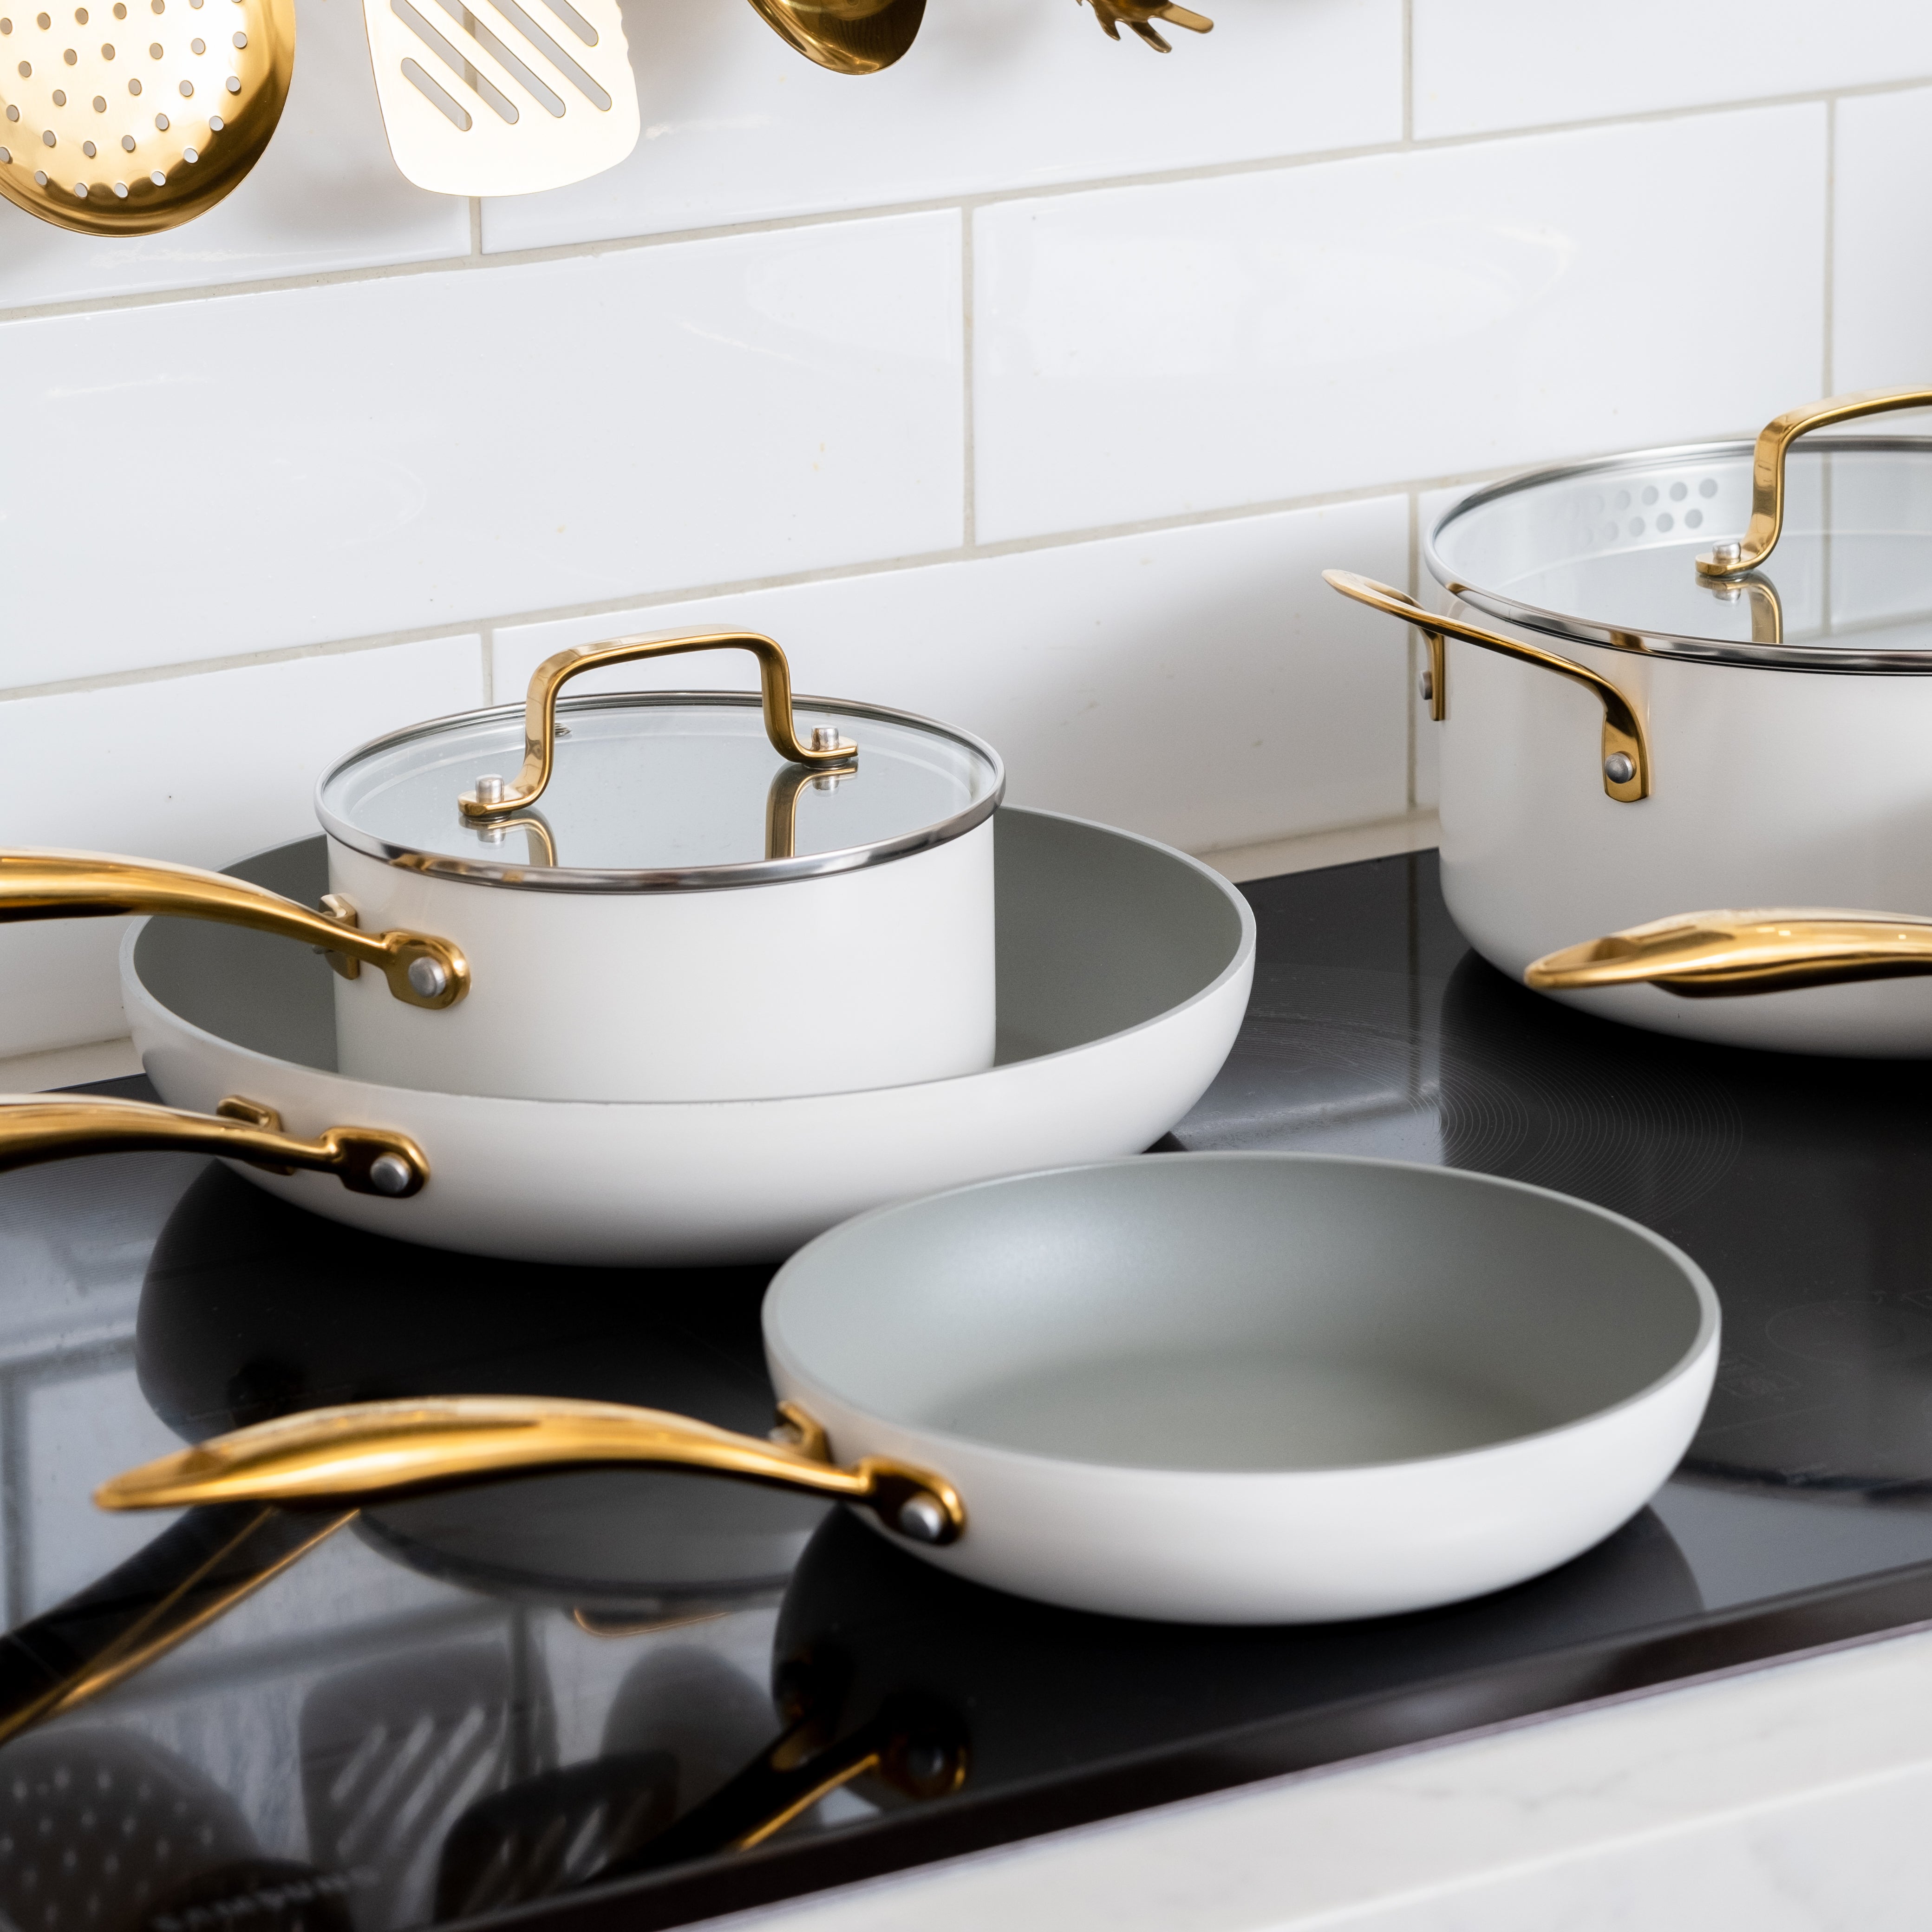 Styled Settings White Pots and Pans Set Nonstick-15 Piece Luxe White Cookware  Set PFOA Free Non Toxic,Oven Safe,Induction Safe Cooking Pot with Strainer  Lid,Gold Cooking Utensils,Gold Pots & Pans… 